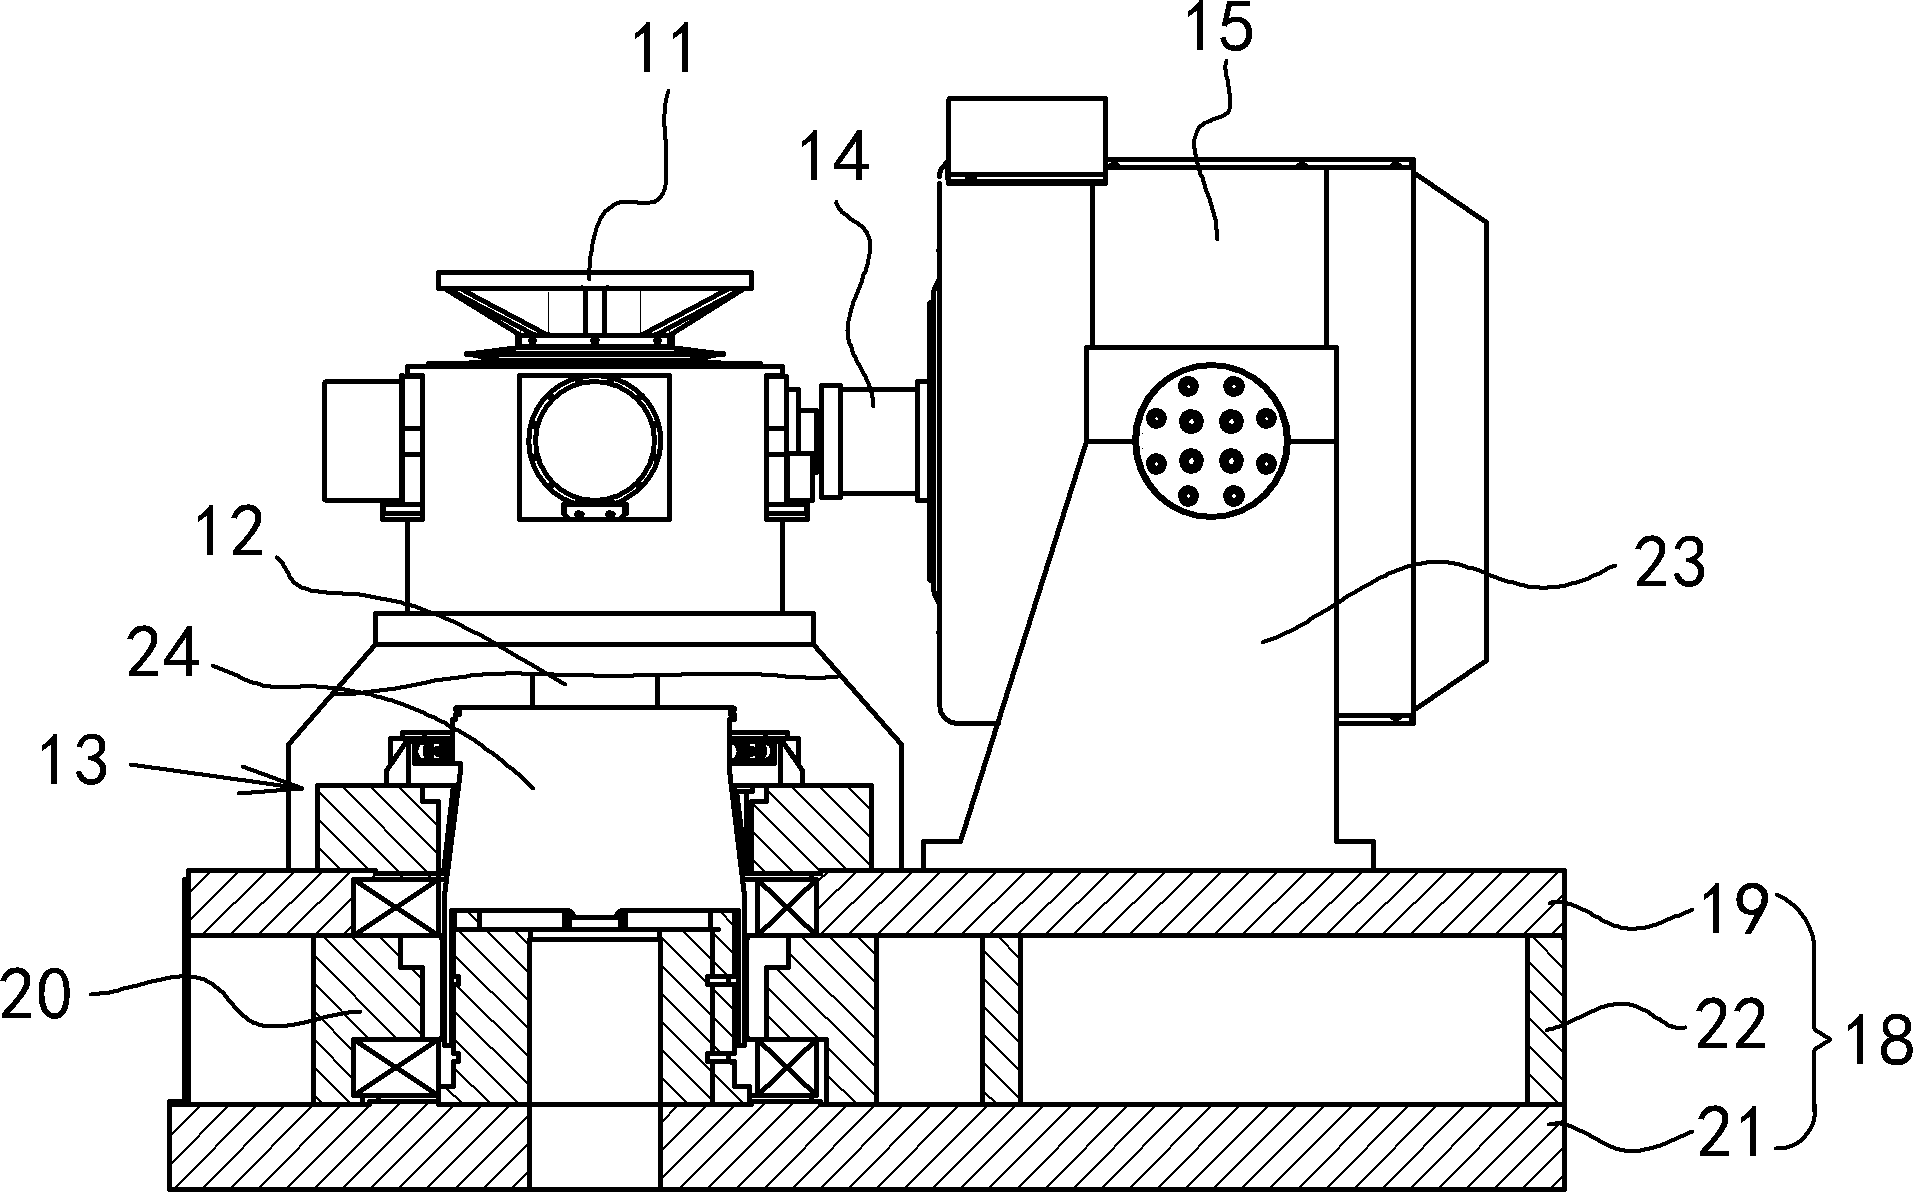 Two-shaft vibration test device with integrated base